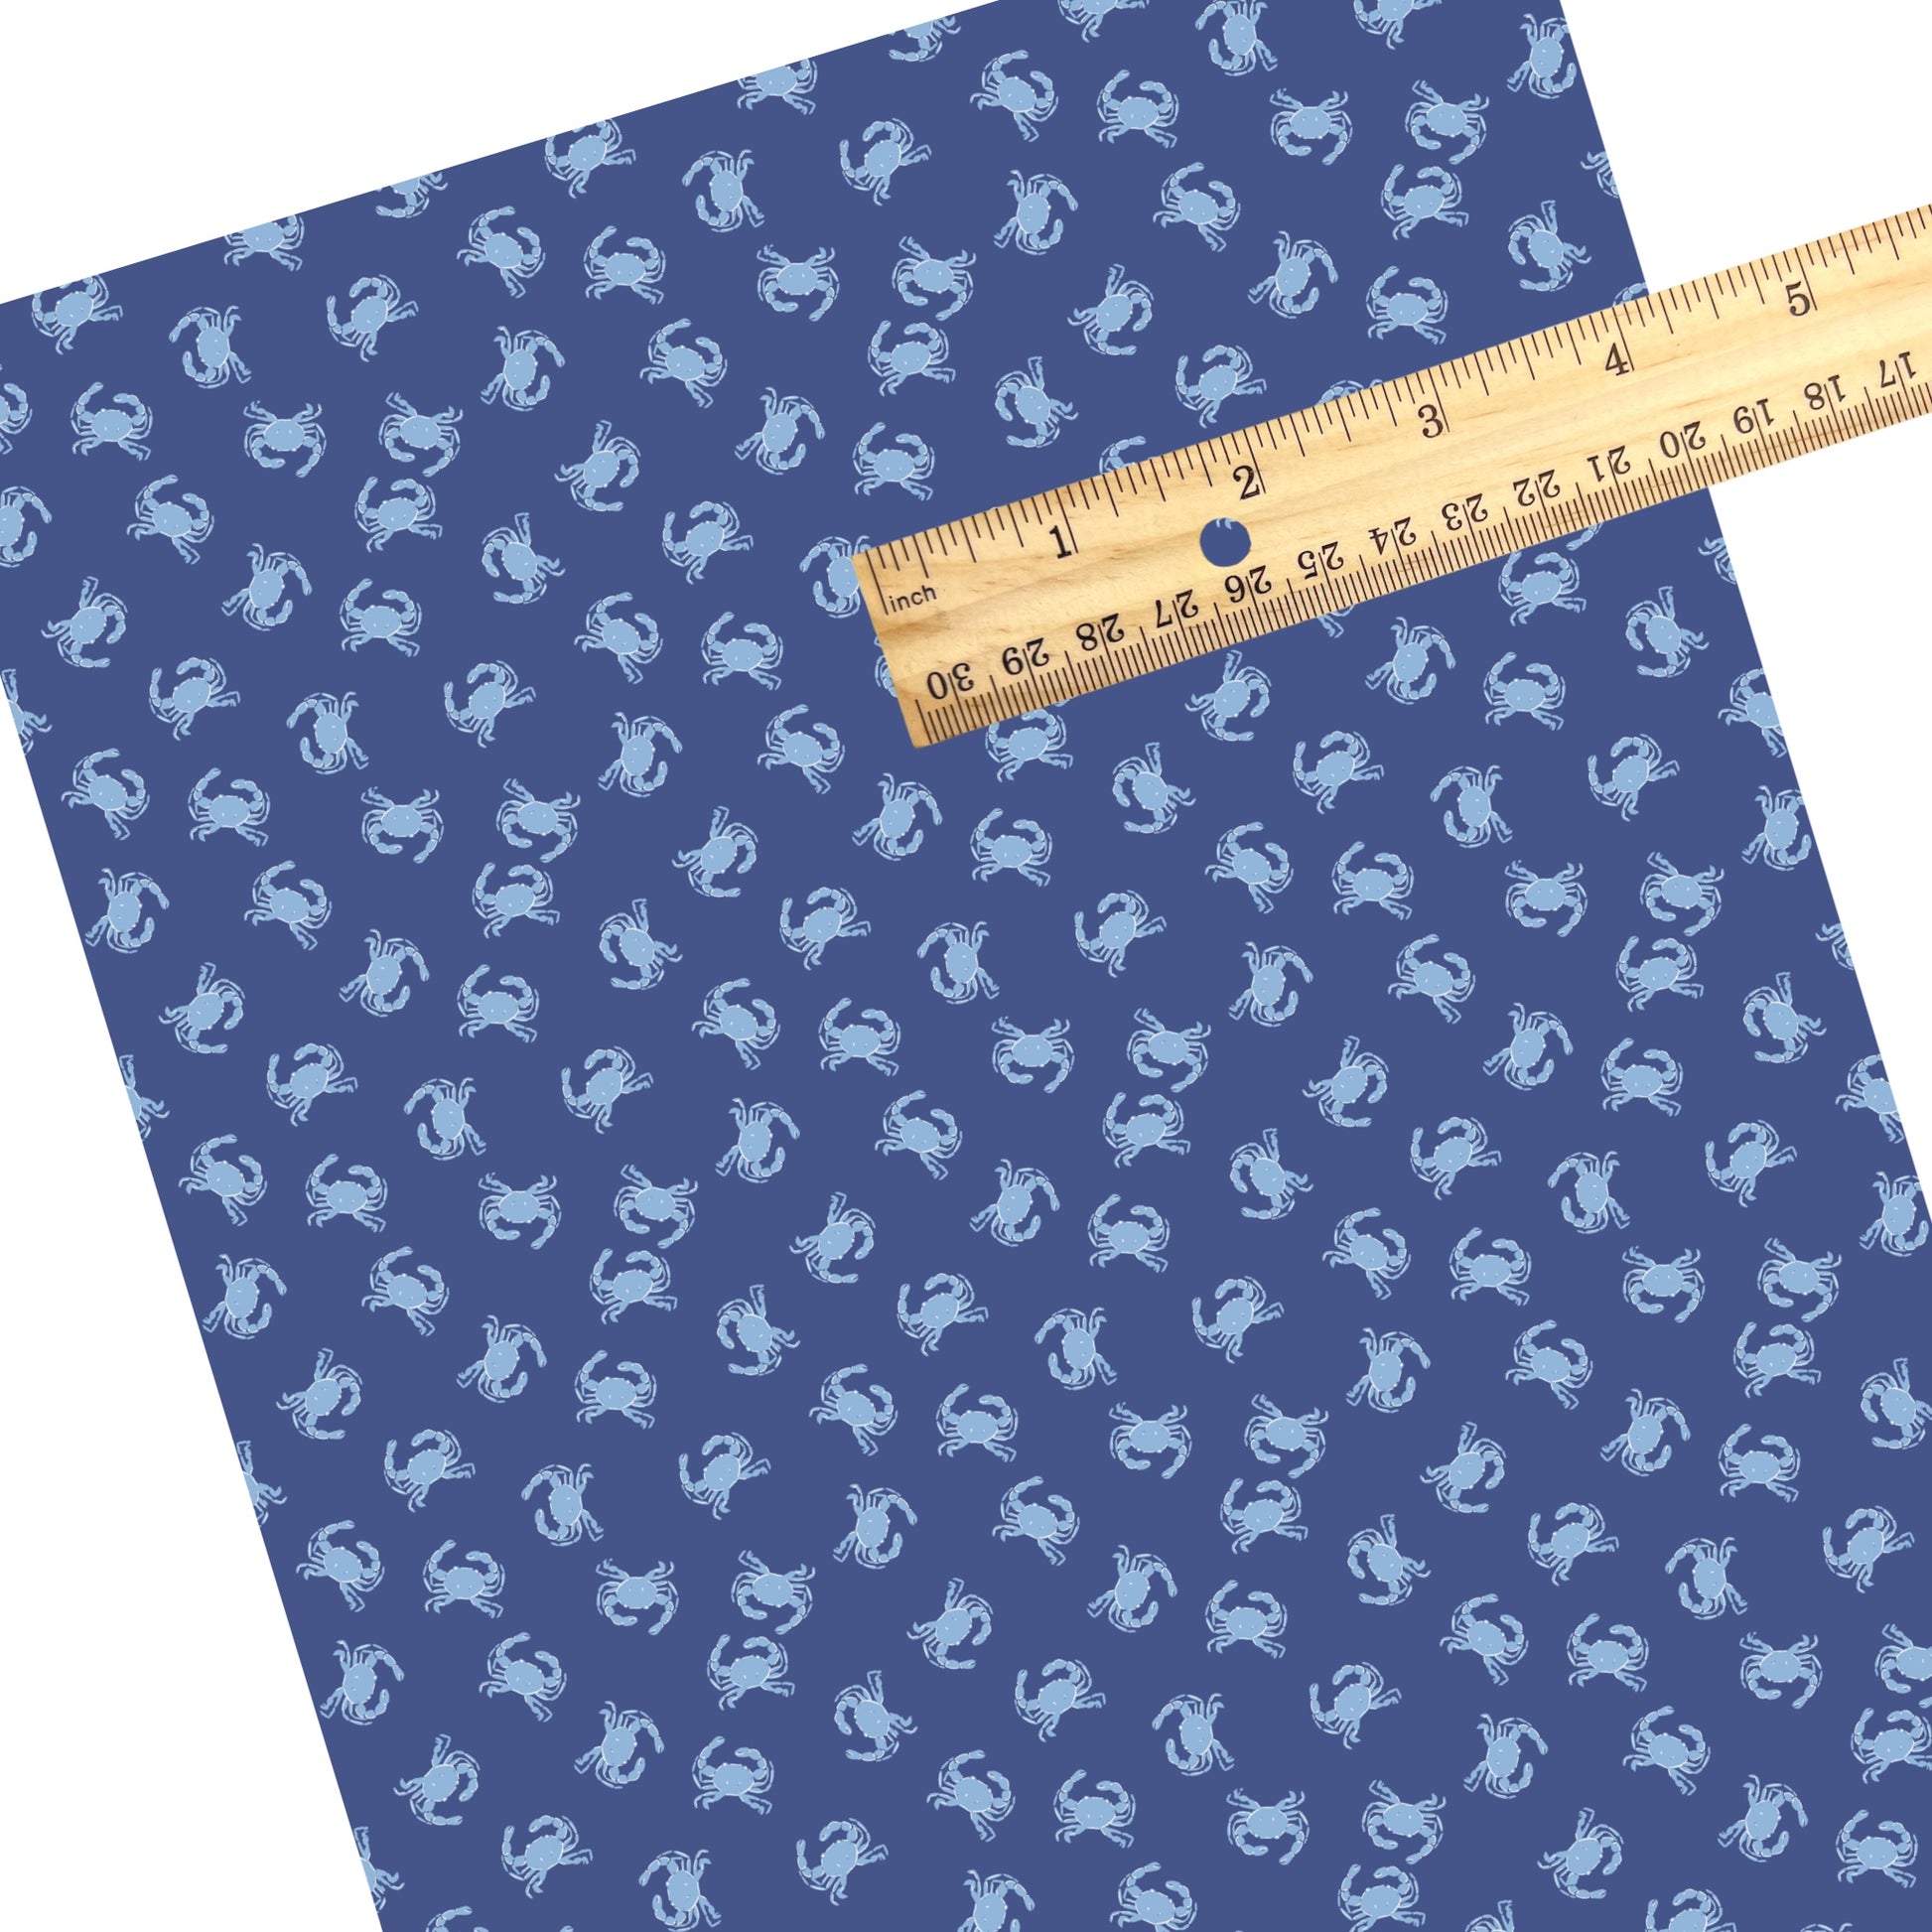 These summer faux leather sheets contain the following design elements: light blue crabs on dark blue. Our CPSIA compliant faux leather sheets or rolls can be used for all types of crafting projects.